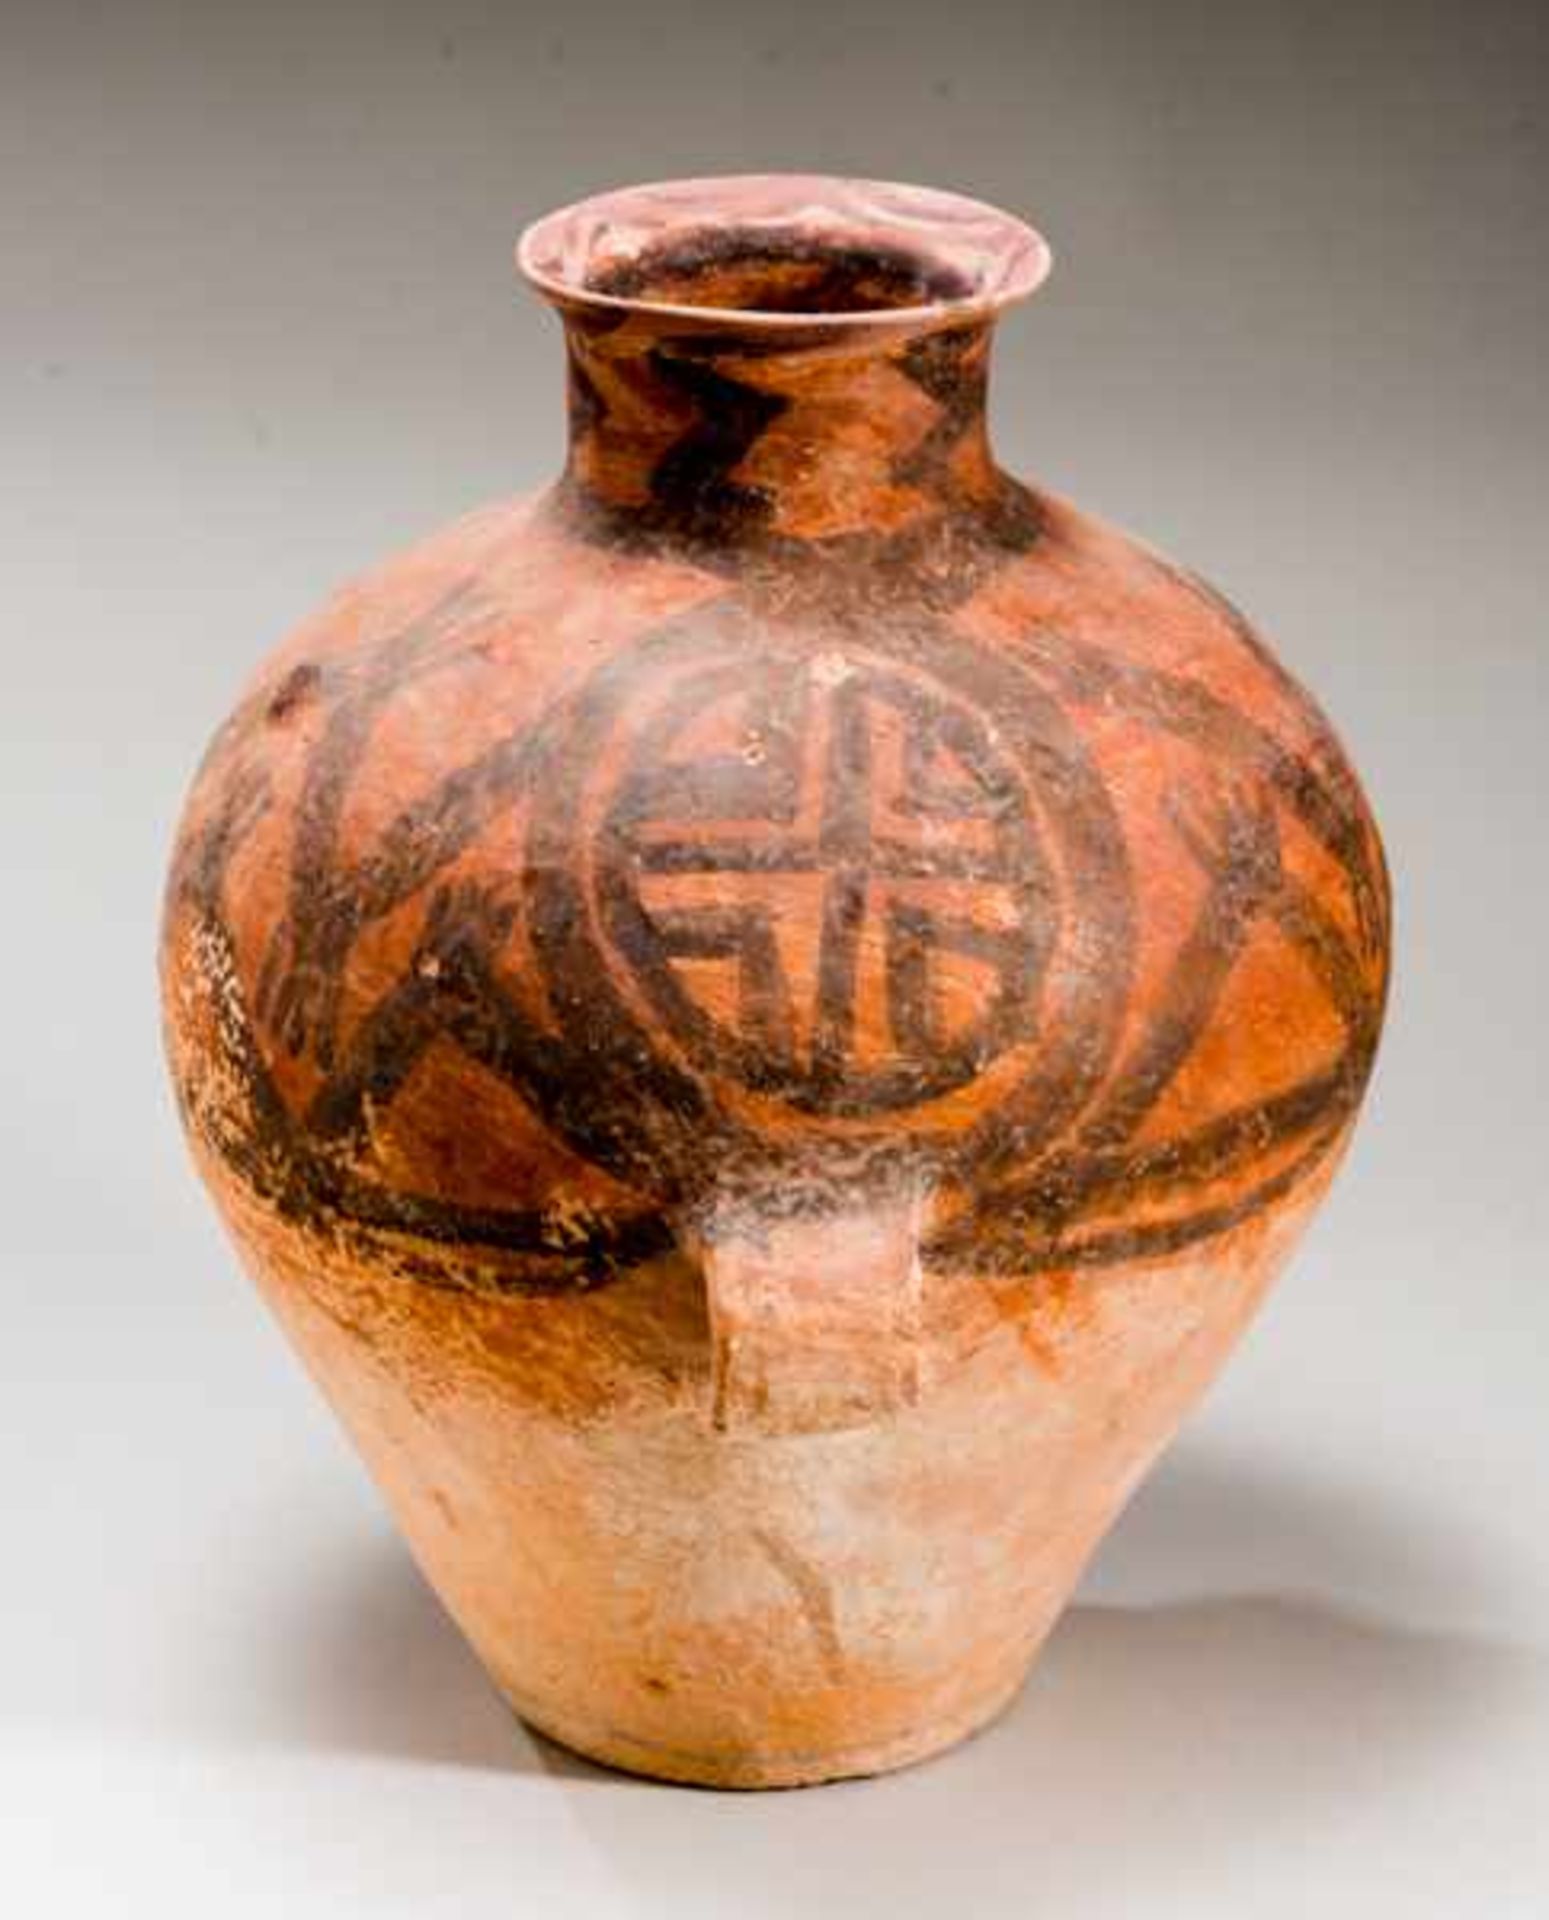 LARGE VESSEL Terracotta with the original painting. China, Yangshao culture (3000-2000BCE) Majiayao, - Image 2 of 6